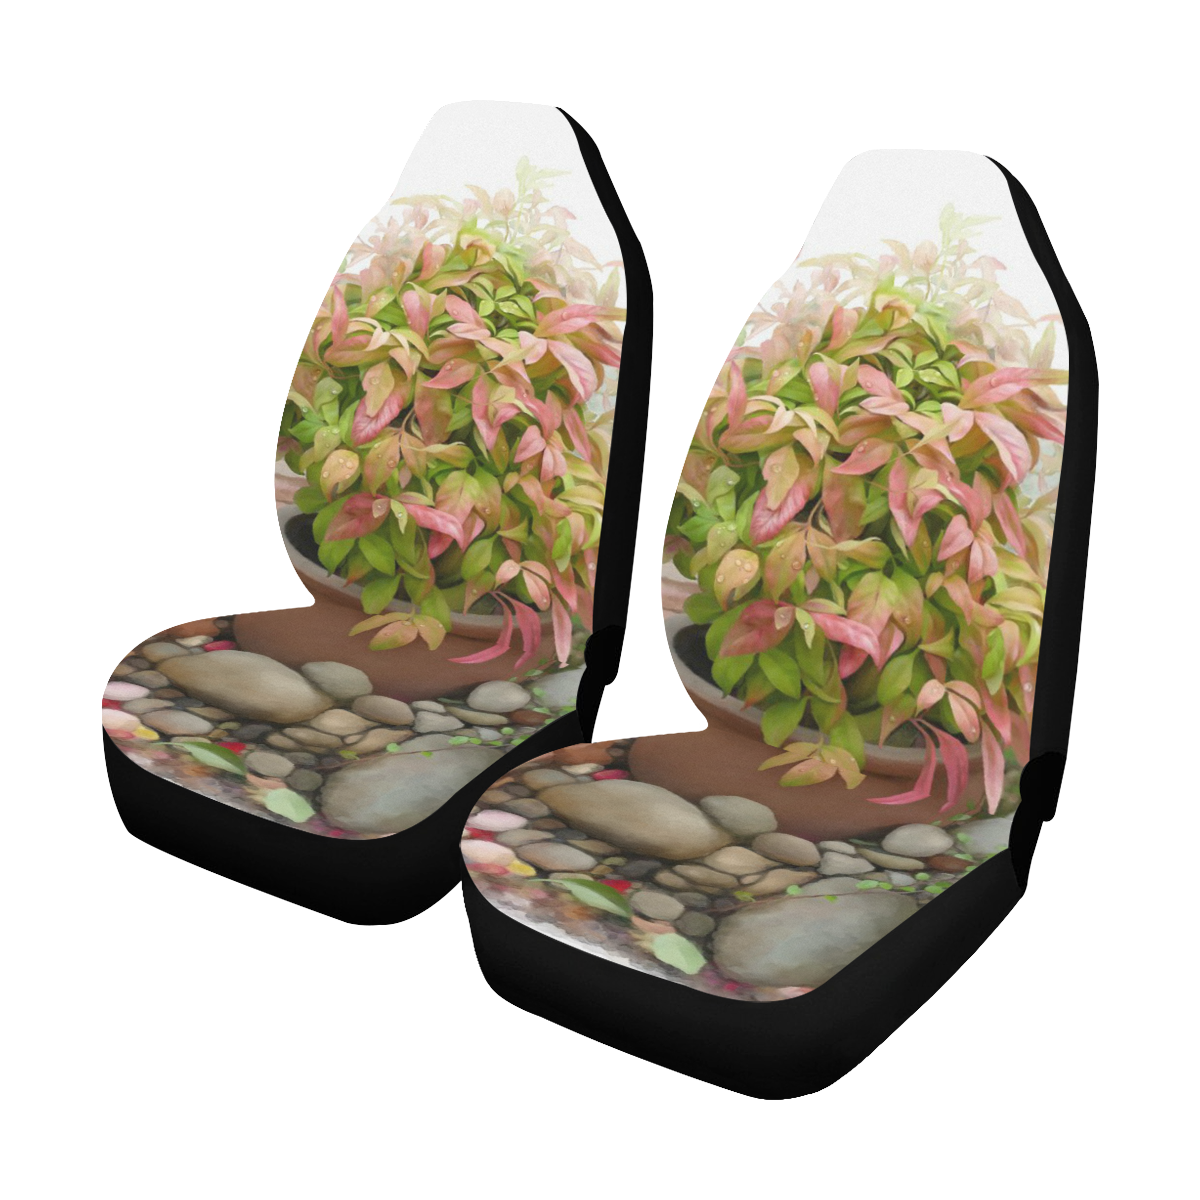 Pot full of colors, floral watercolors, plant Car Seat Covers (Set of 2)